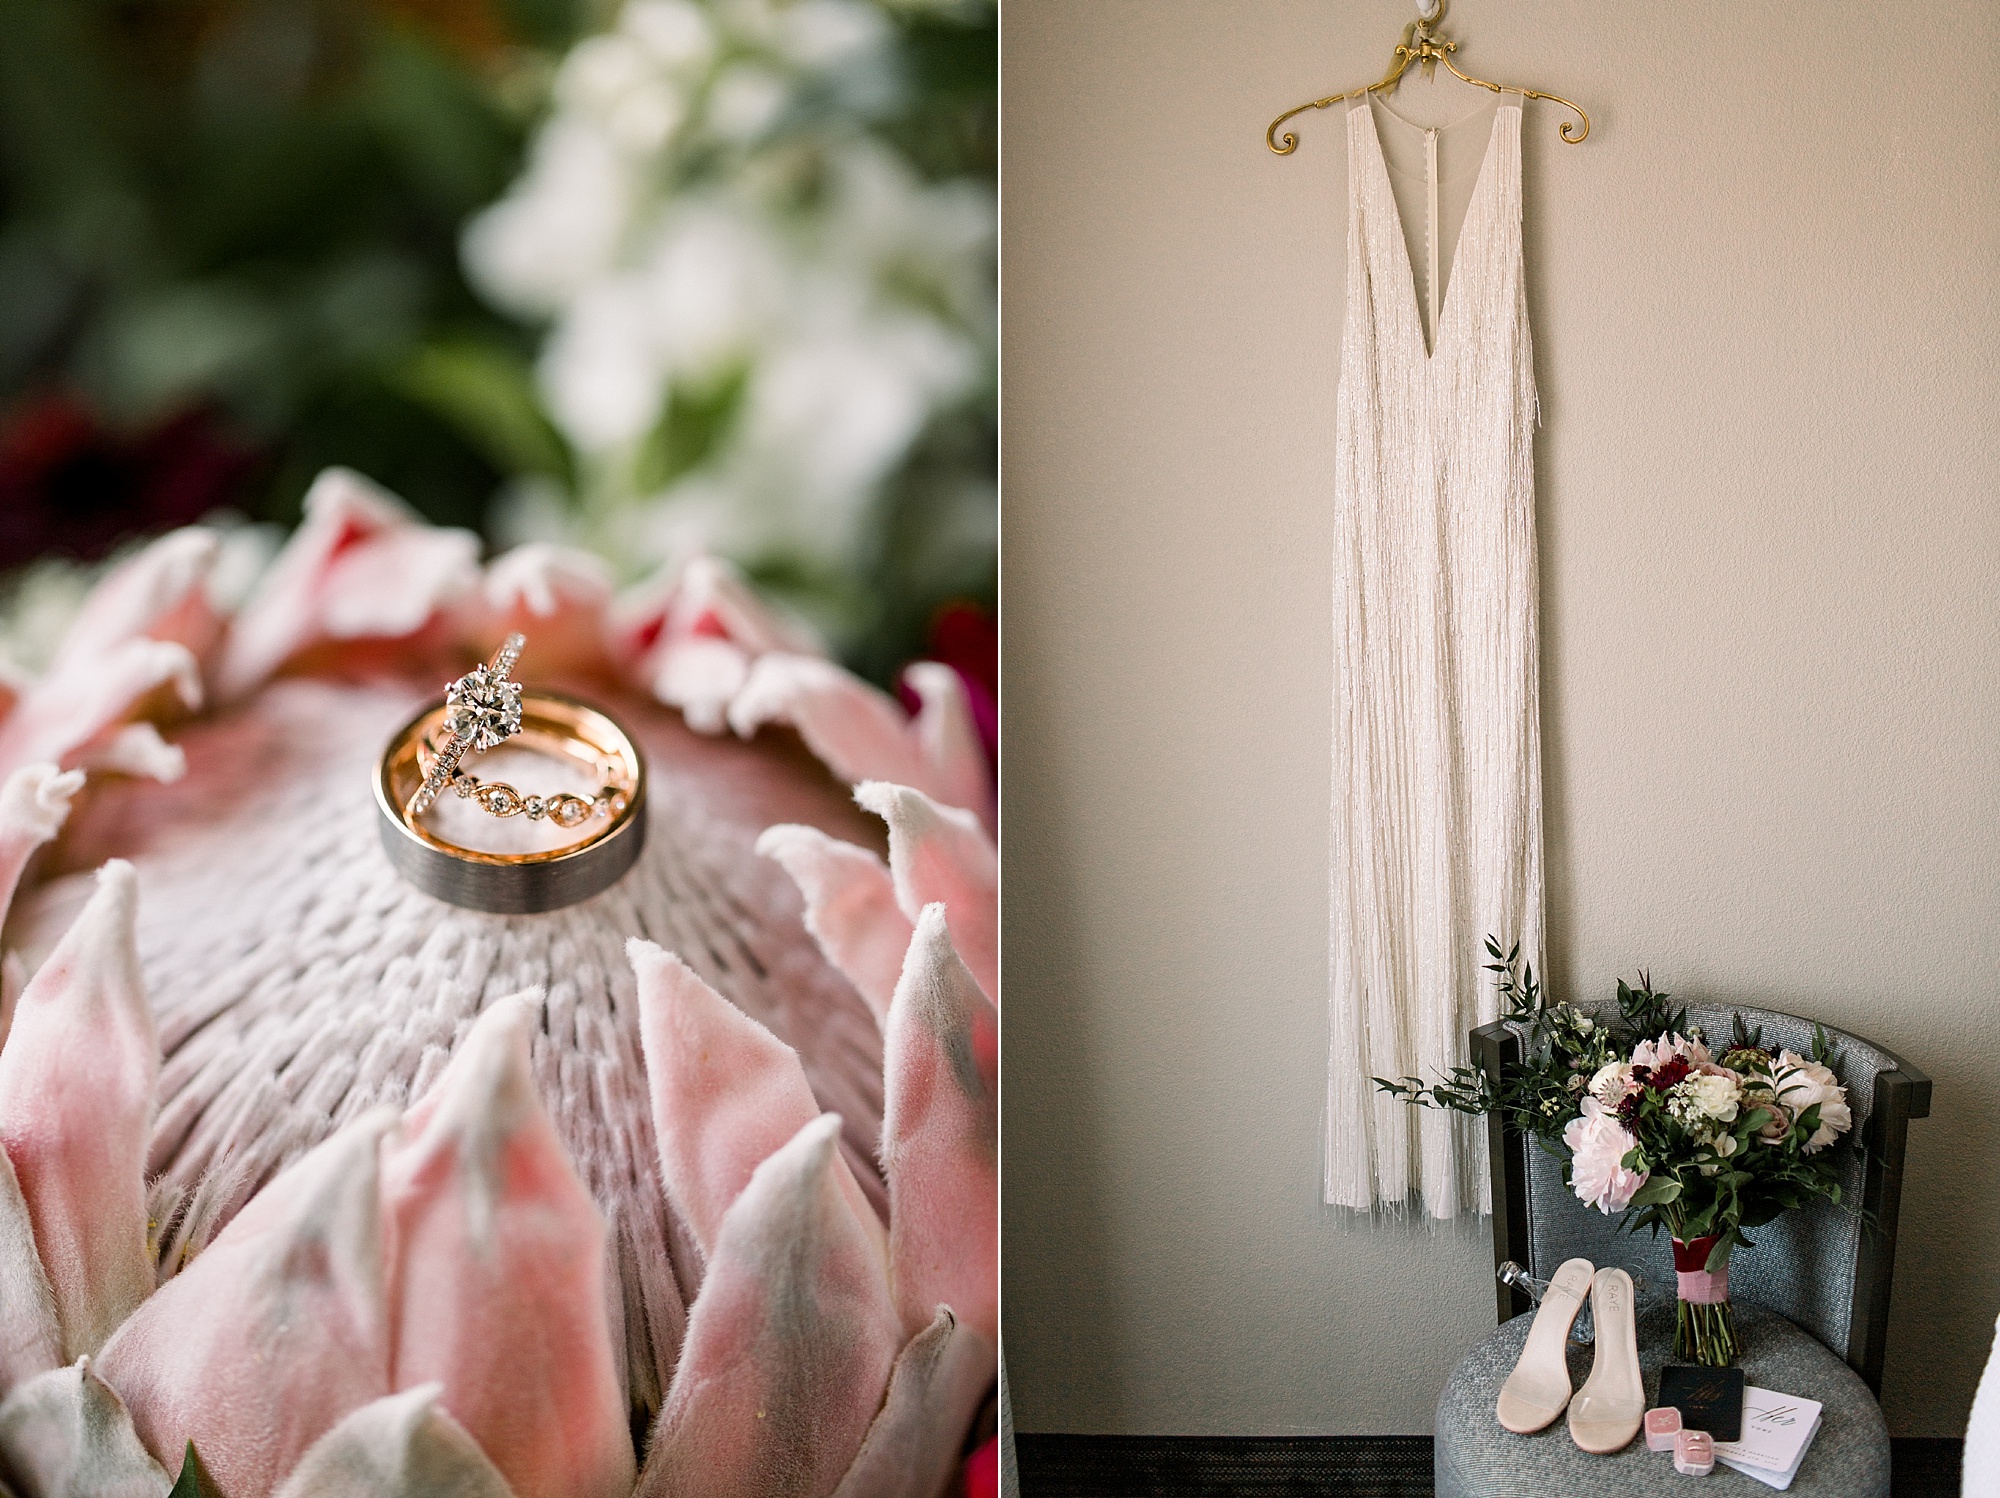 pink flower holds wedding bands and wedding dress hangs on wall 